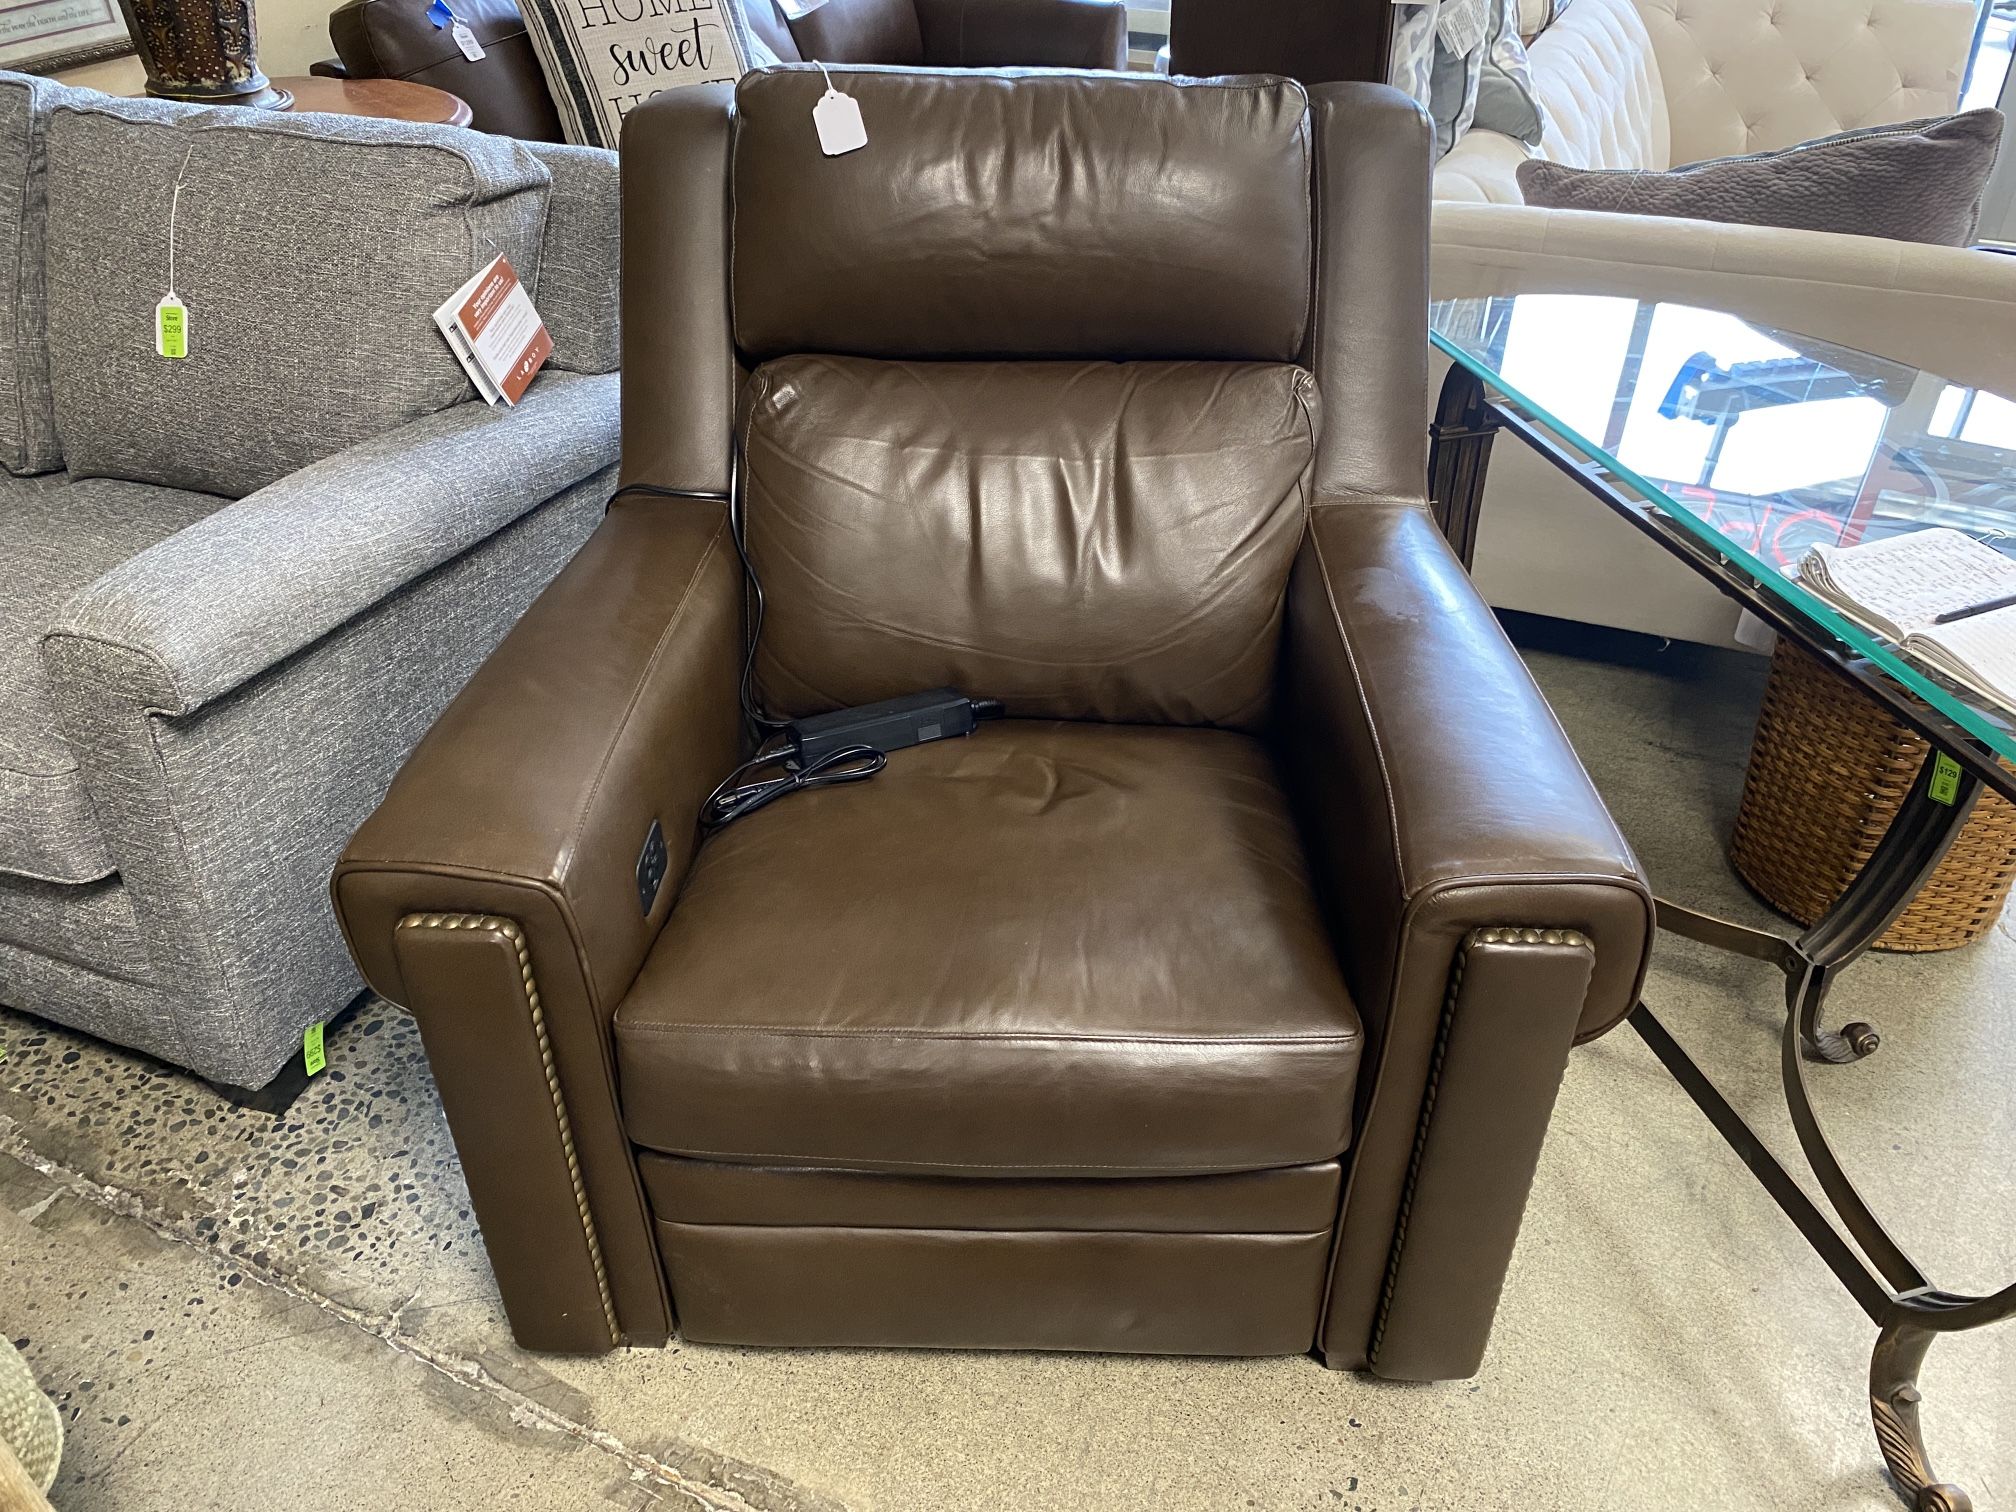 BRADINGTON YOUNG Brown Leather Nailhead Power Reclining Arm Chair